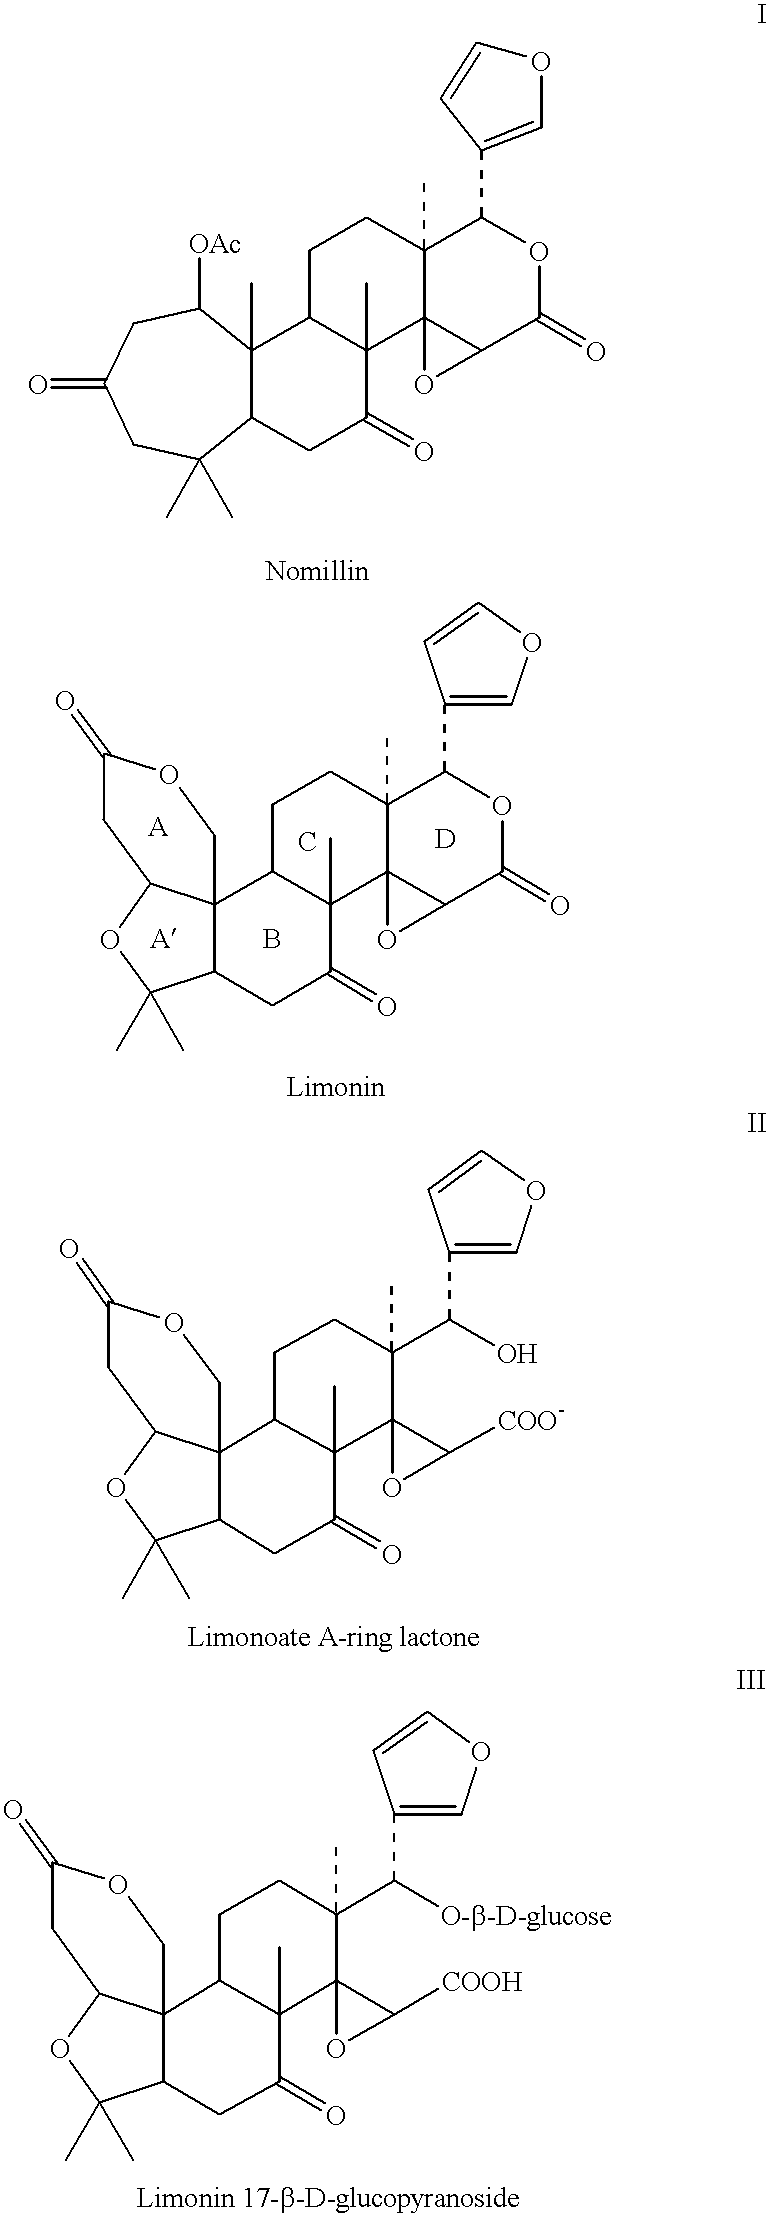 Compositions and methods for treatment of neoplastic diseases with combinations of limonoids, flavonoids and tocotrienols